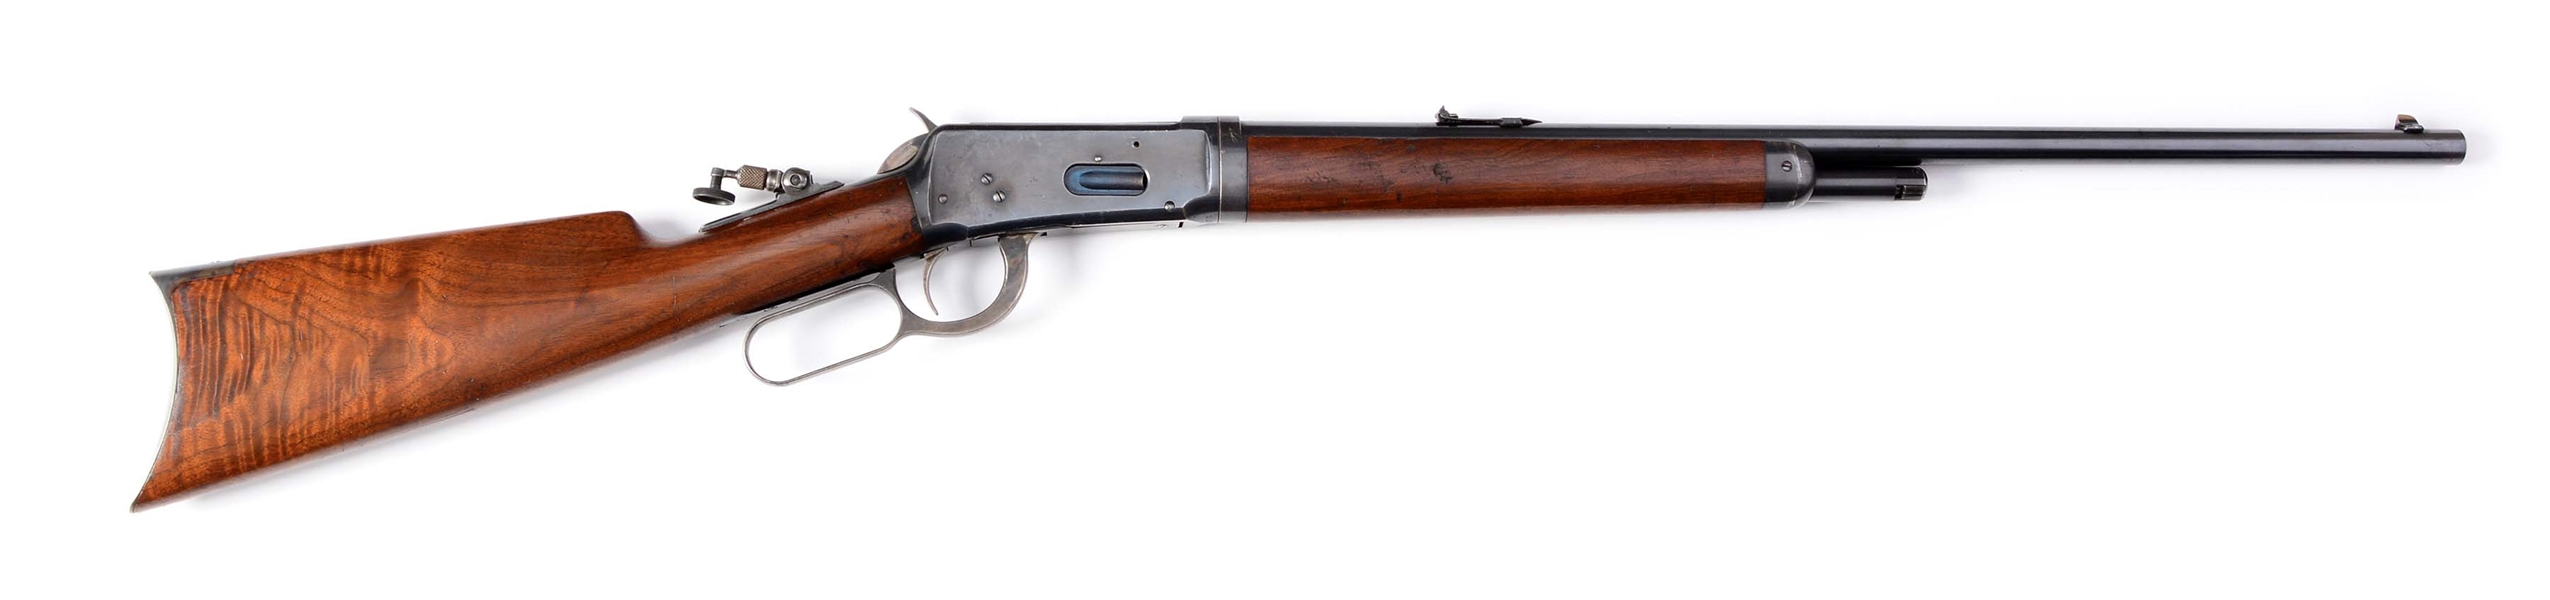 (C) HIGH CONDITION SPECIAL ORDER WINCHESTER MODEL 1894 TAKEDOWN LEVER ACTION RIFLE (1901).